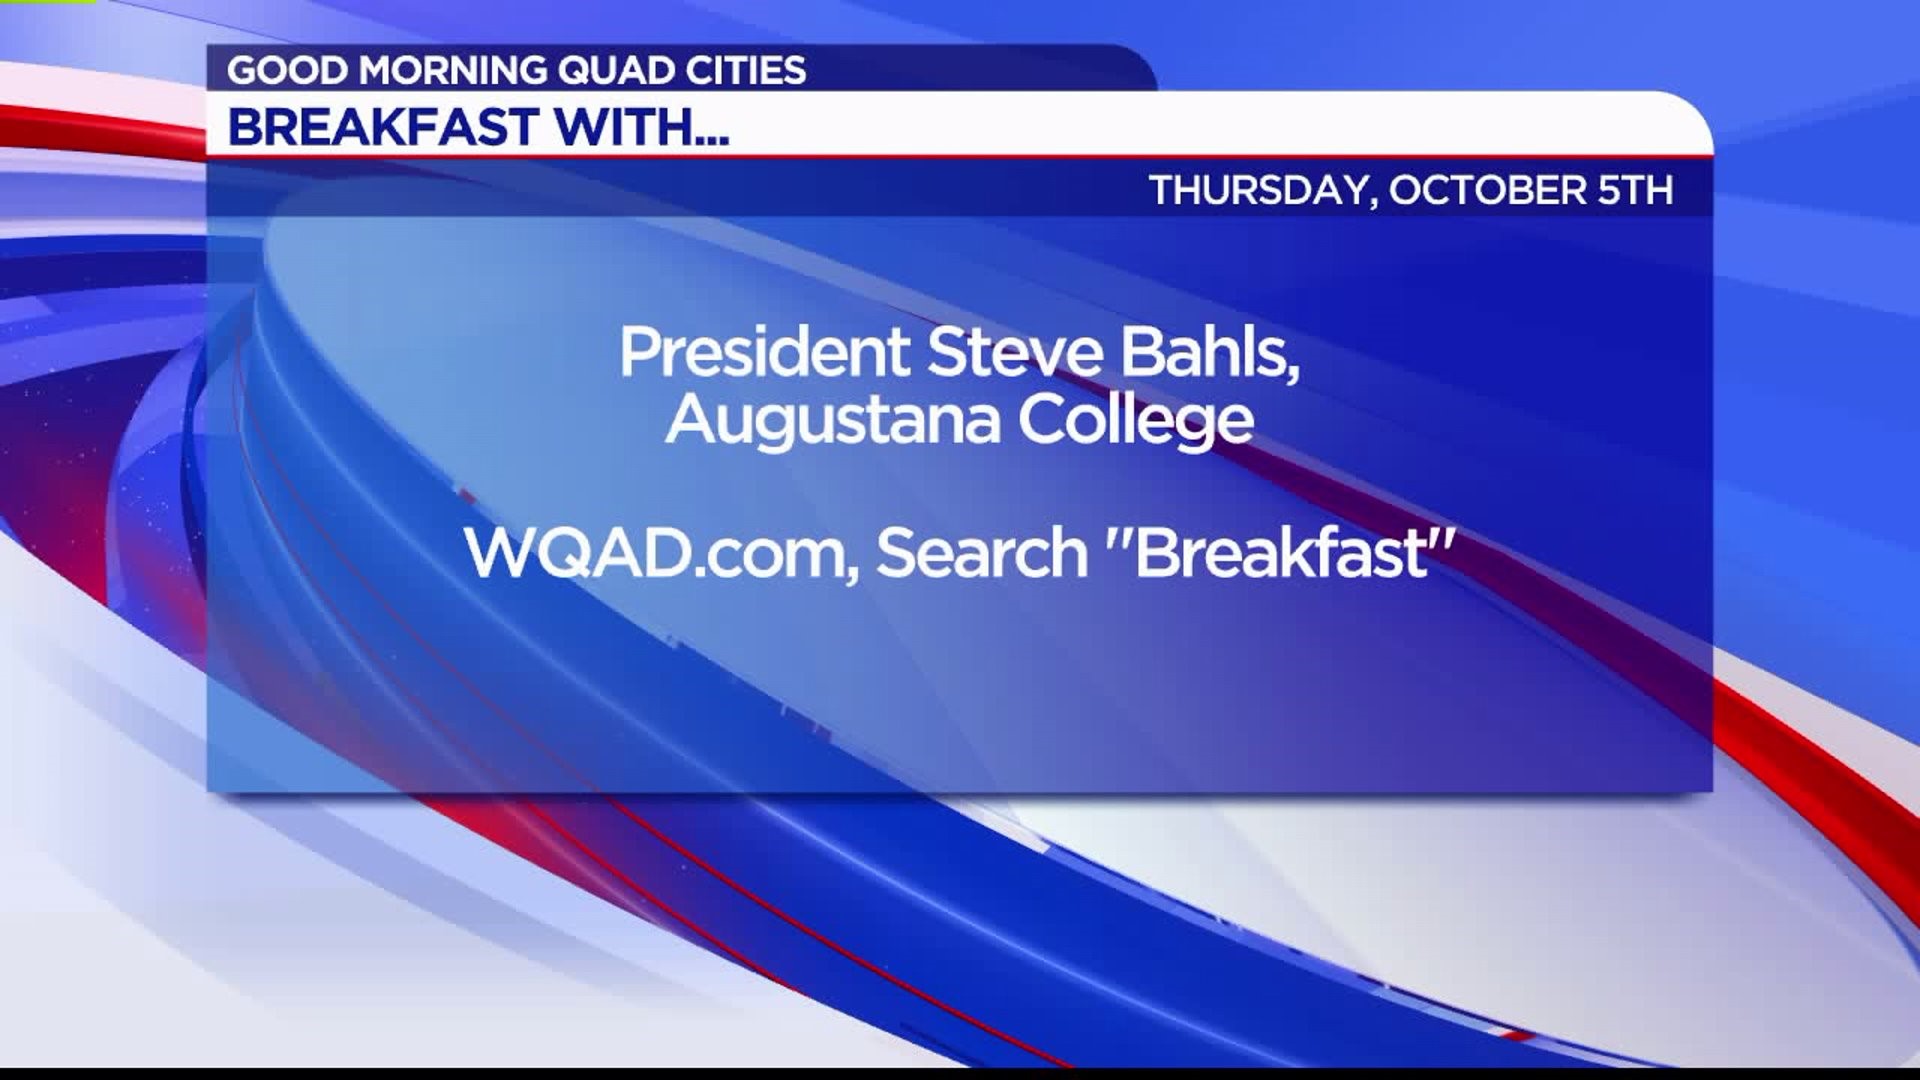 Our Next Breakfast With: The President of Augustana College